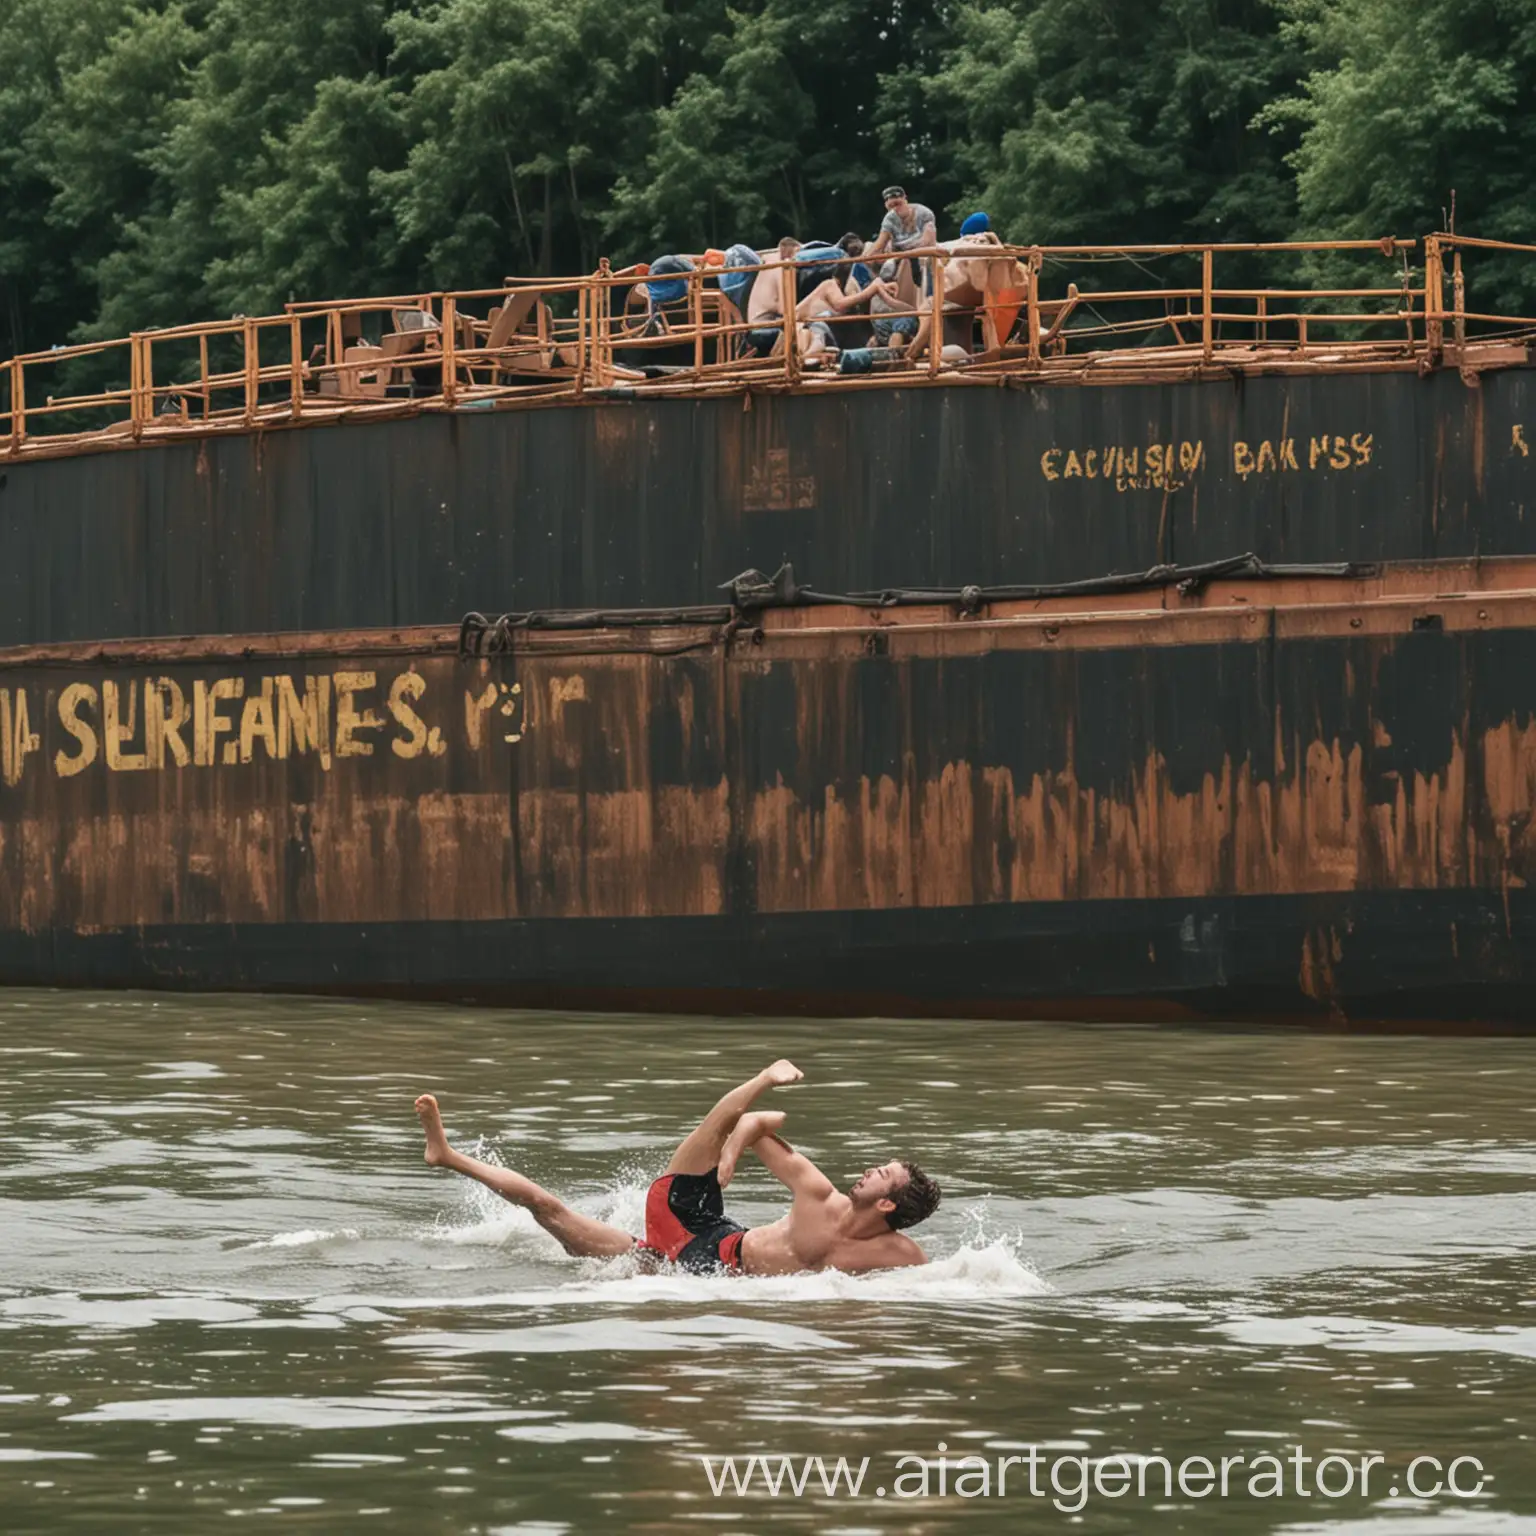 Man-Swimming-Away-in-Panic-from-Cargo-Barge